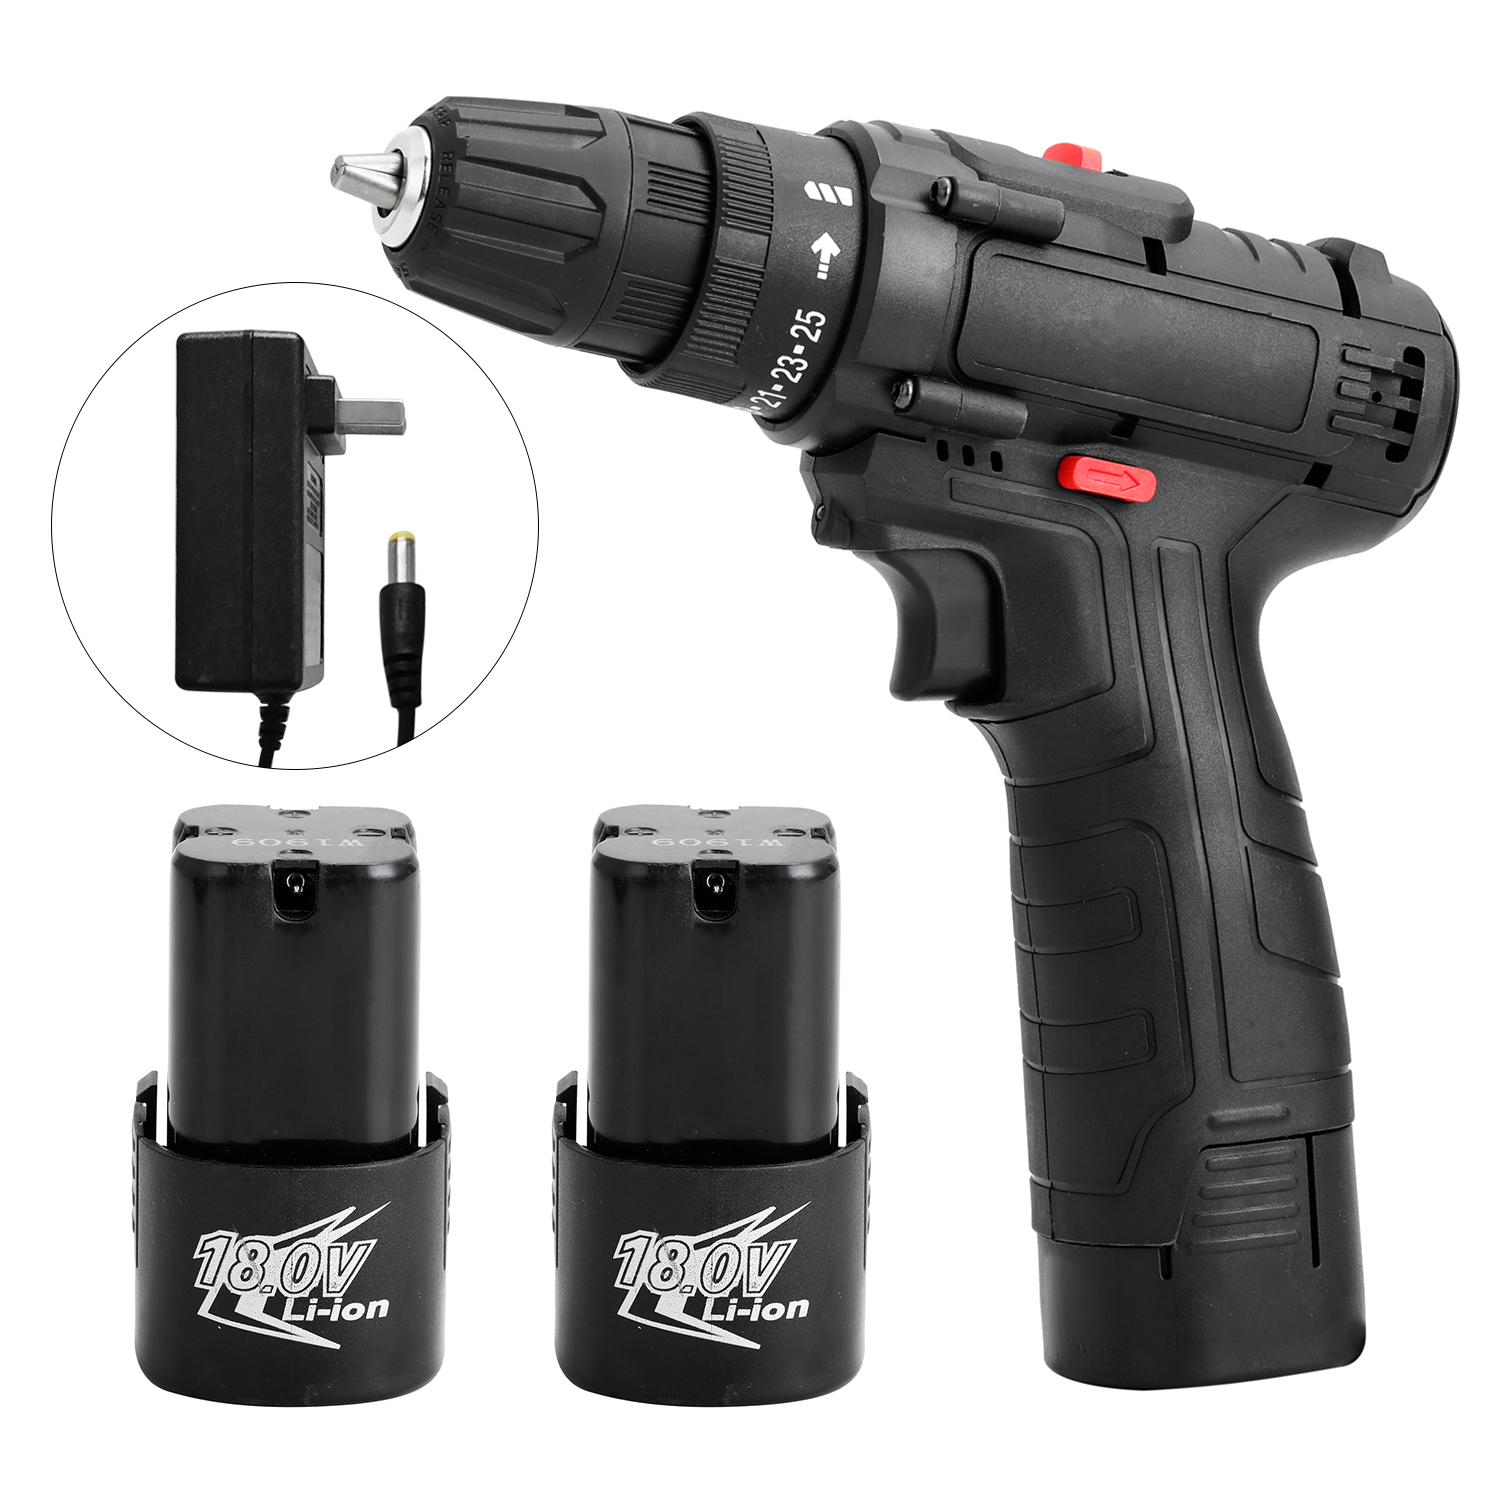 18V 600W Electric Impact Cordless Drill High-power Lithium Battery Wireless Rechargeable Hand Drills Home DIY Electric Power